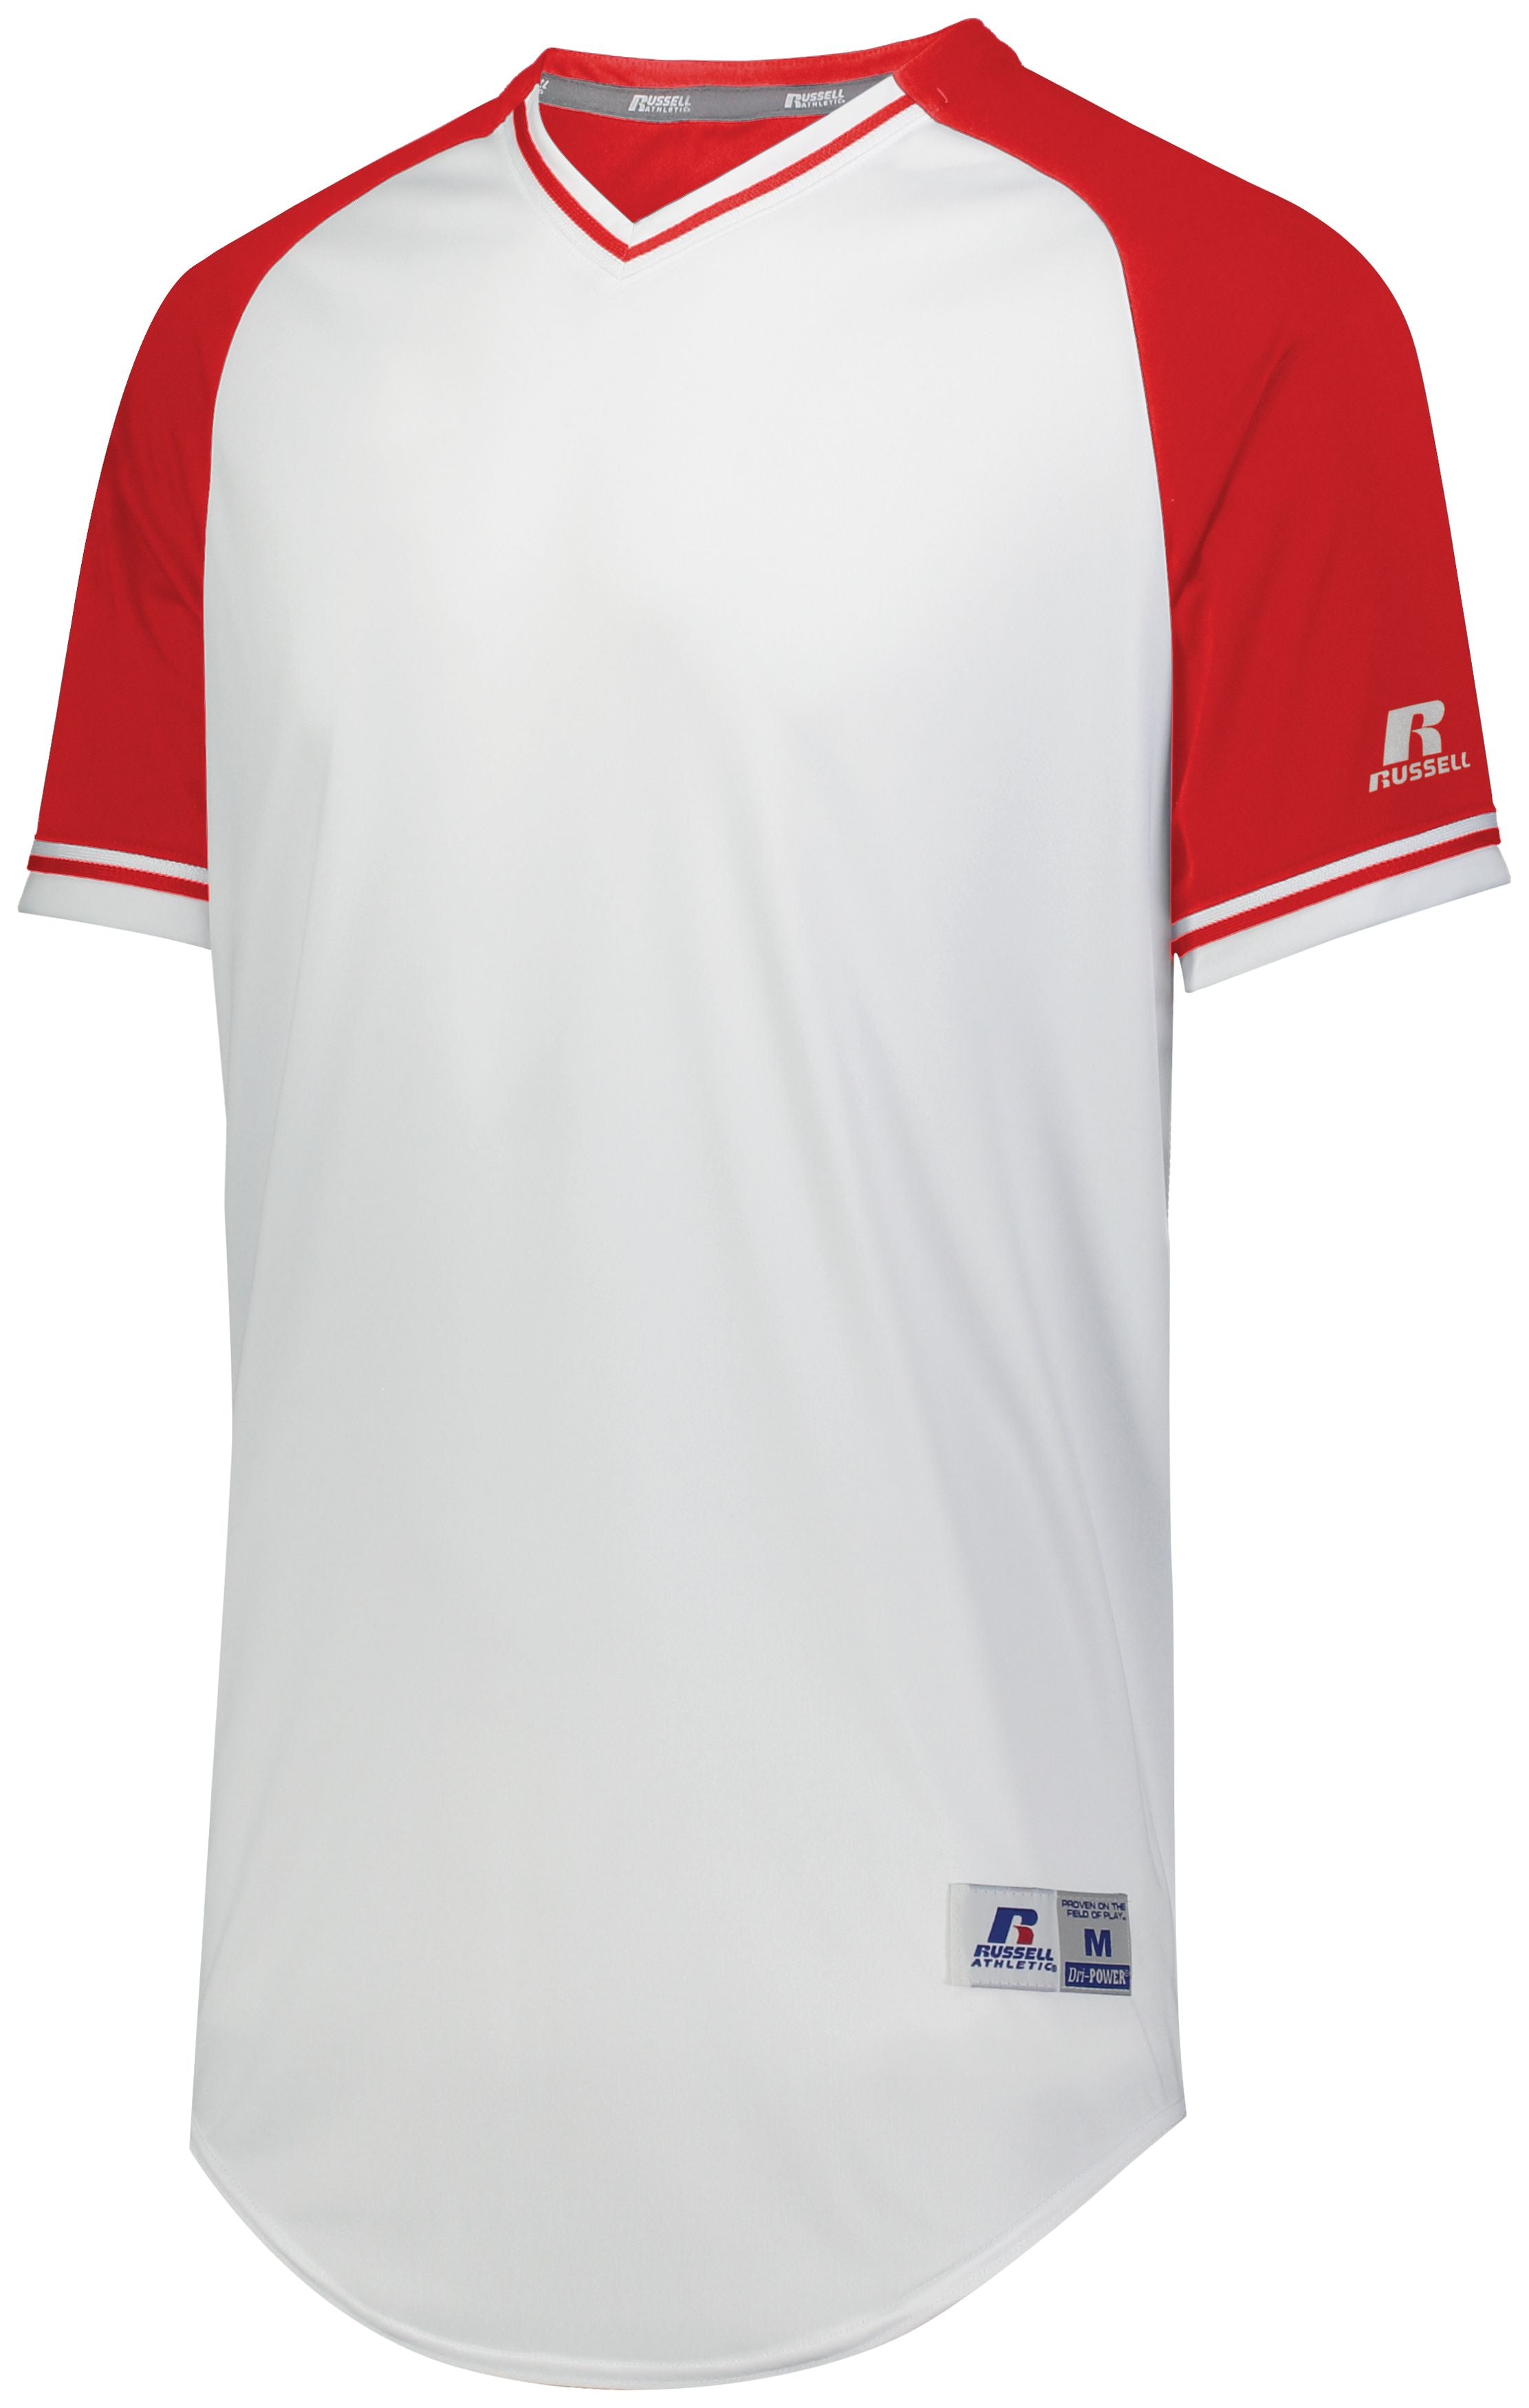 Russell Athletic Youth Classic V-Neck Jersey in White/True Red/White  -Part of the Youth, Youth-Jersey, Baseball, Russell-Athletic-Products, Shirts, All-Sports, All-Sports-1 product lines at KanaleyCreations.com